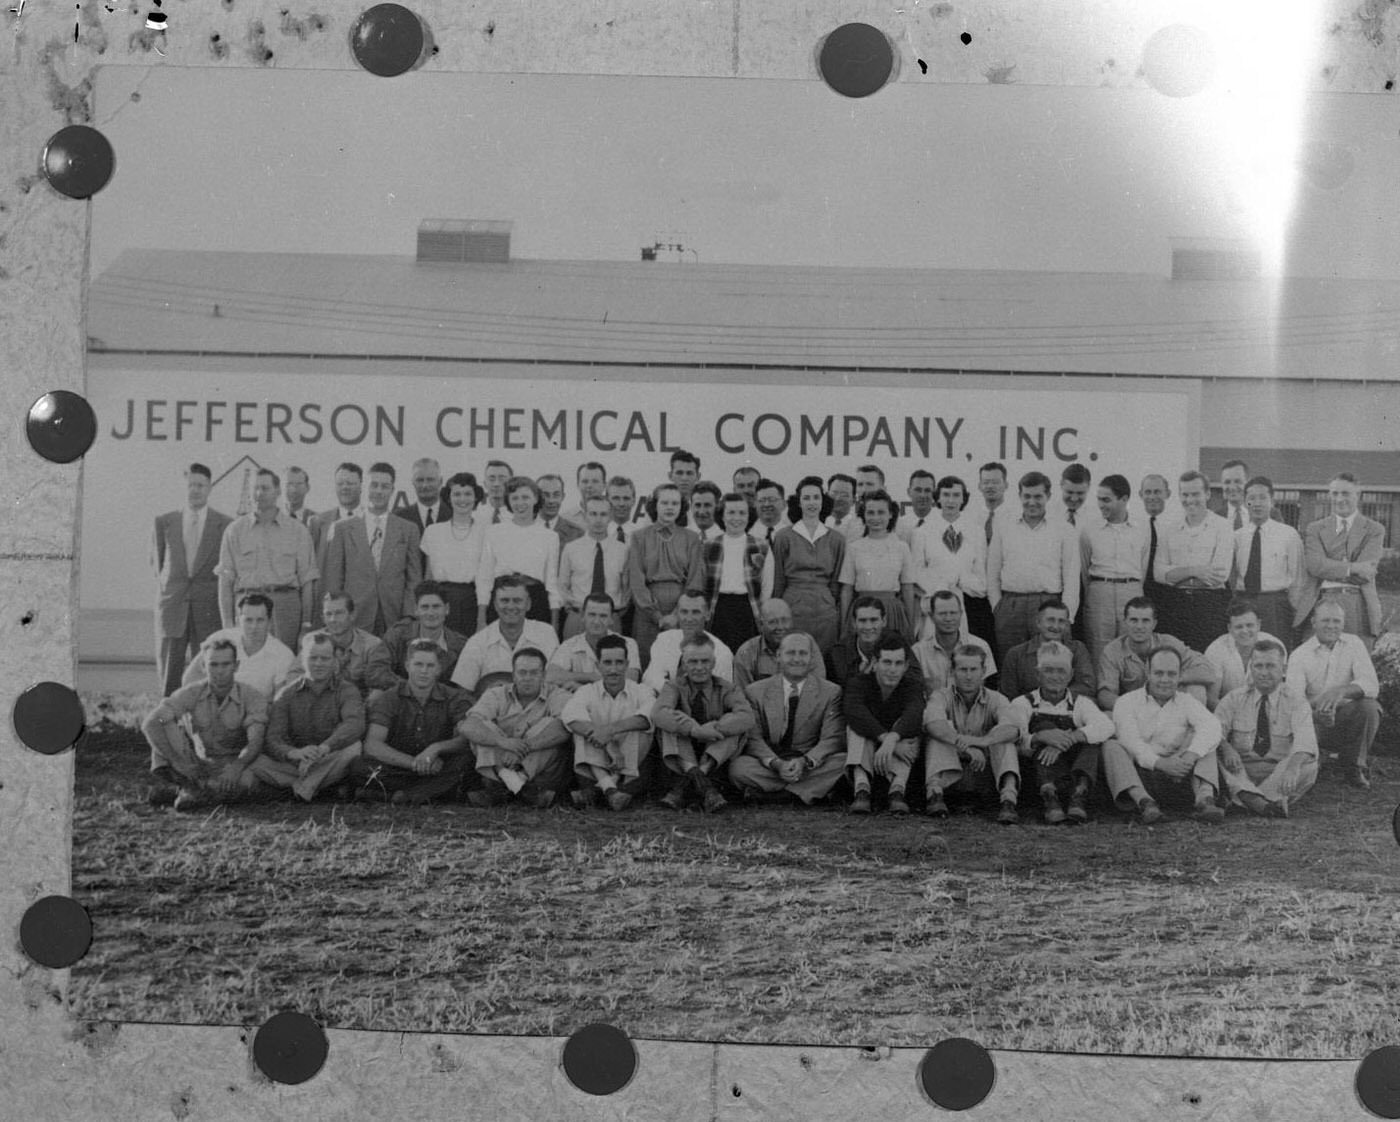 Jefferson Chemical Company Employees in Front of Sign, 1950.